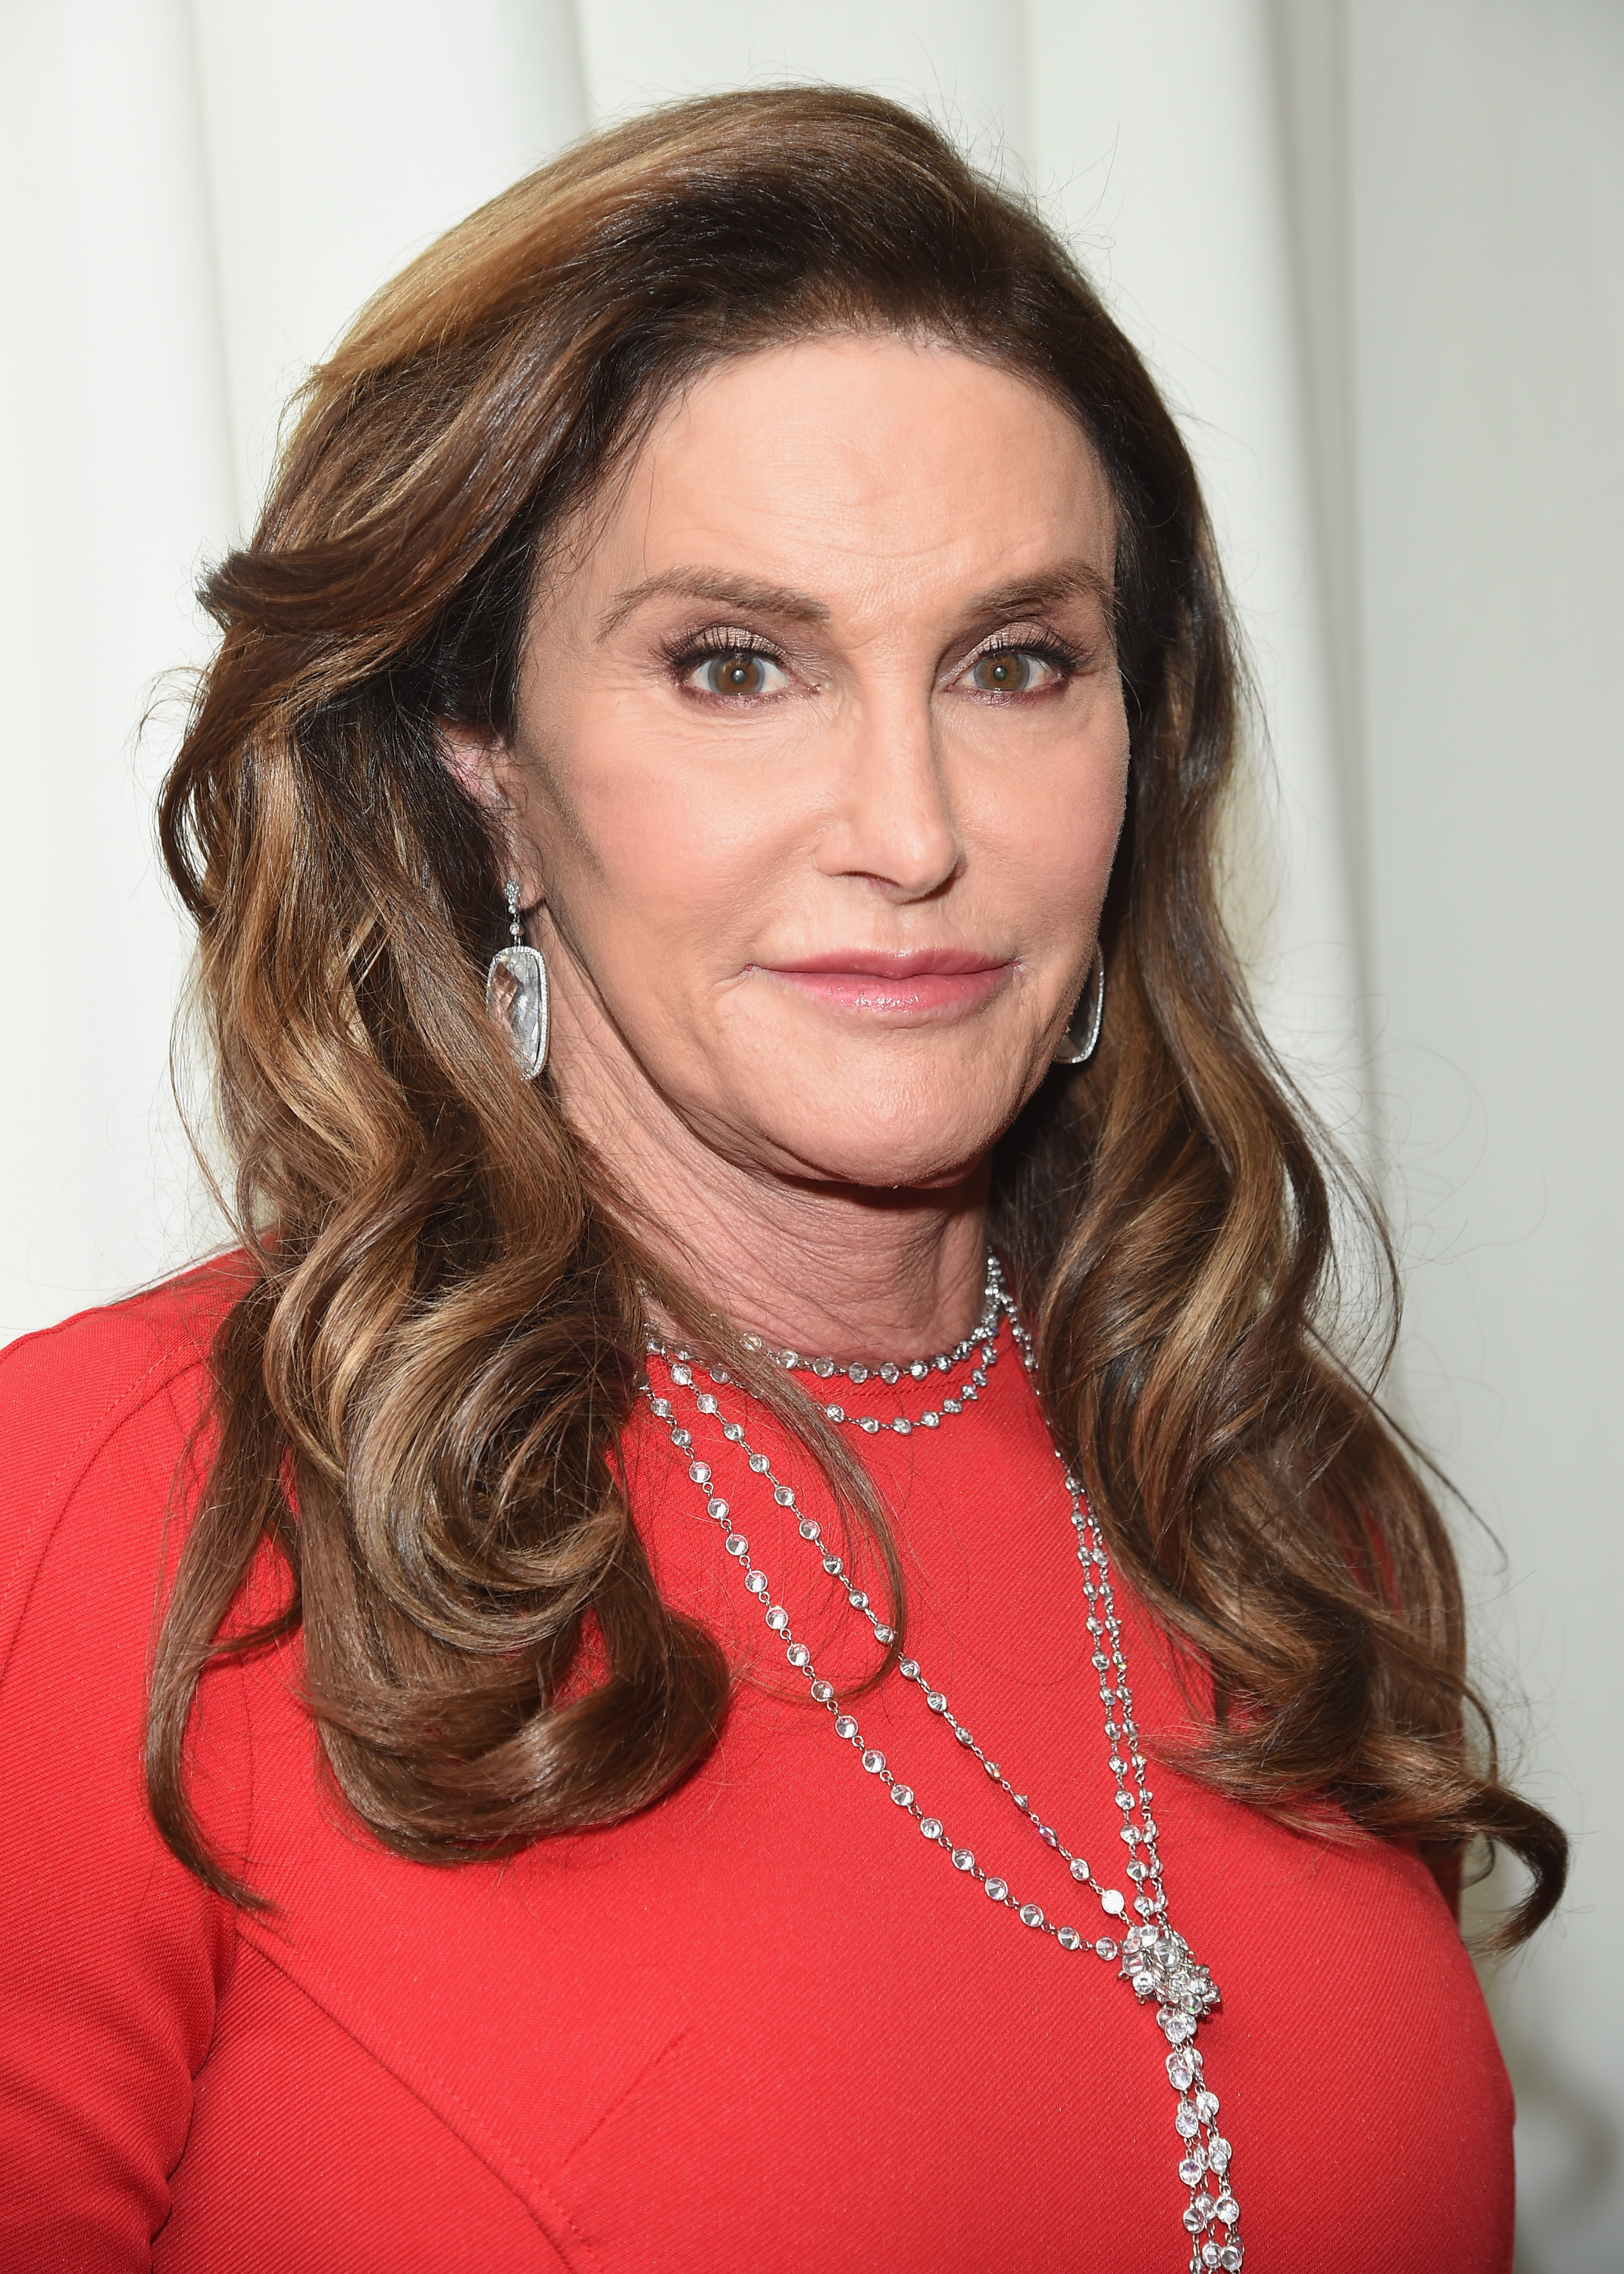 Caitlyn Jenner at the 24th Annual Elton John AIDS Foundation's Oscar Viewing Party in West Hollywood, Calif. on Feb. 28, 2016. (Venturelli/Getty Images for Bulgari)